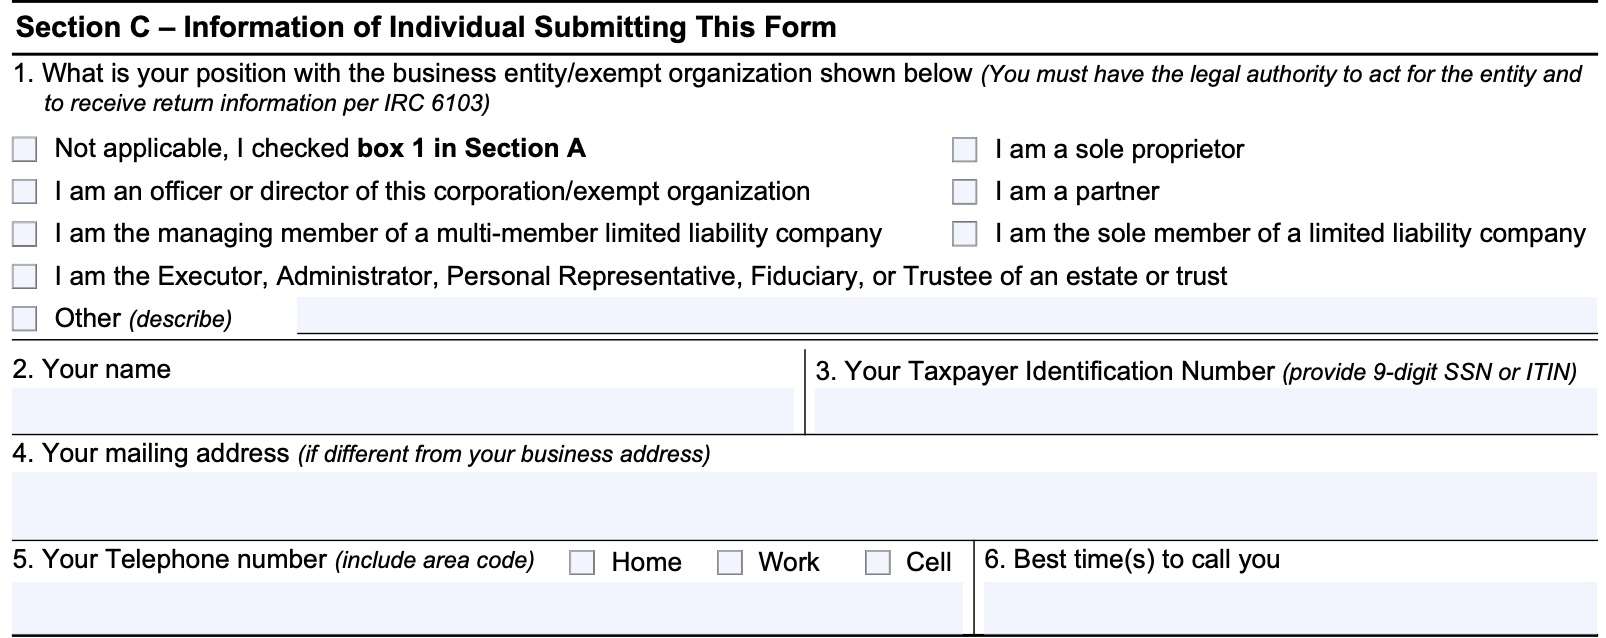 irs form 14039-b, section c: information of individual submitting this form